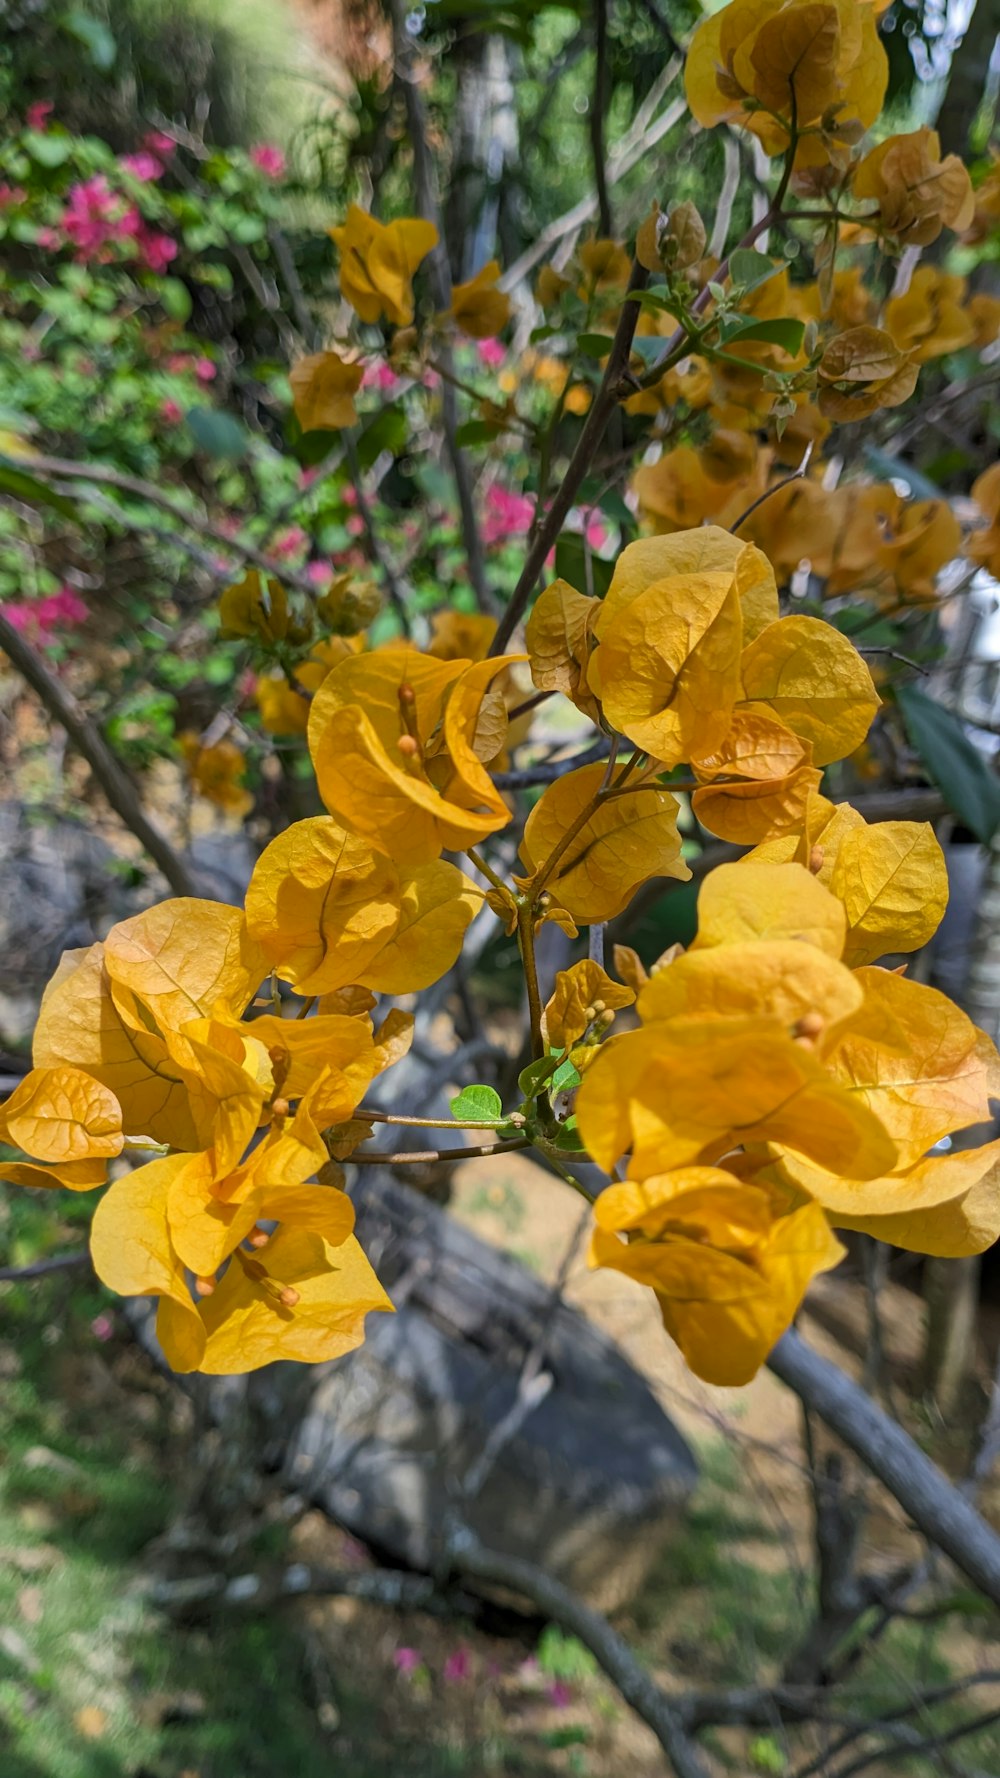 yellow flowers are blooming on a tree branch